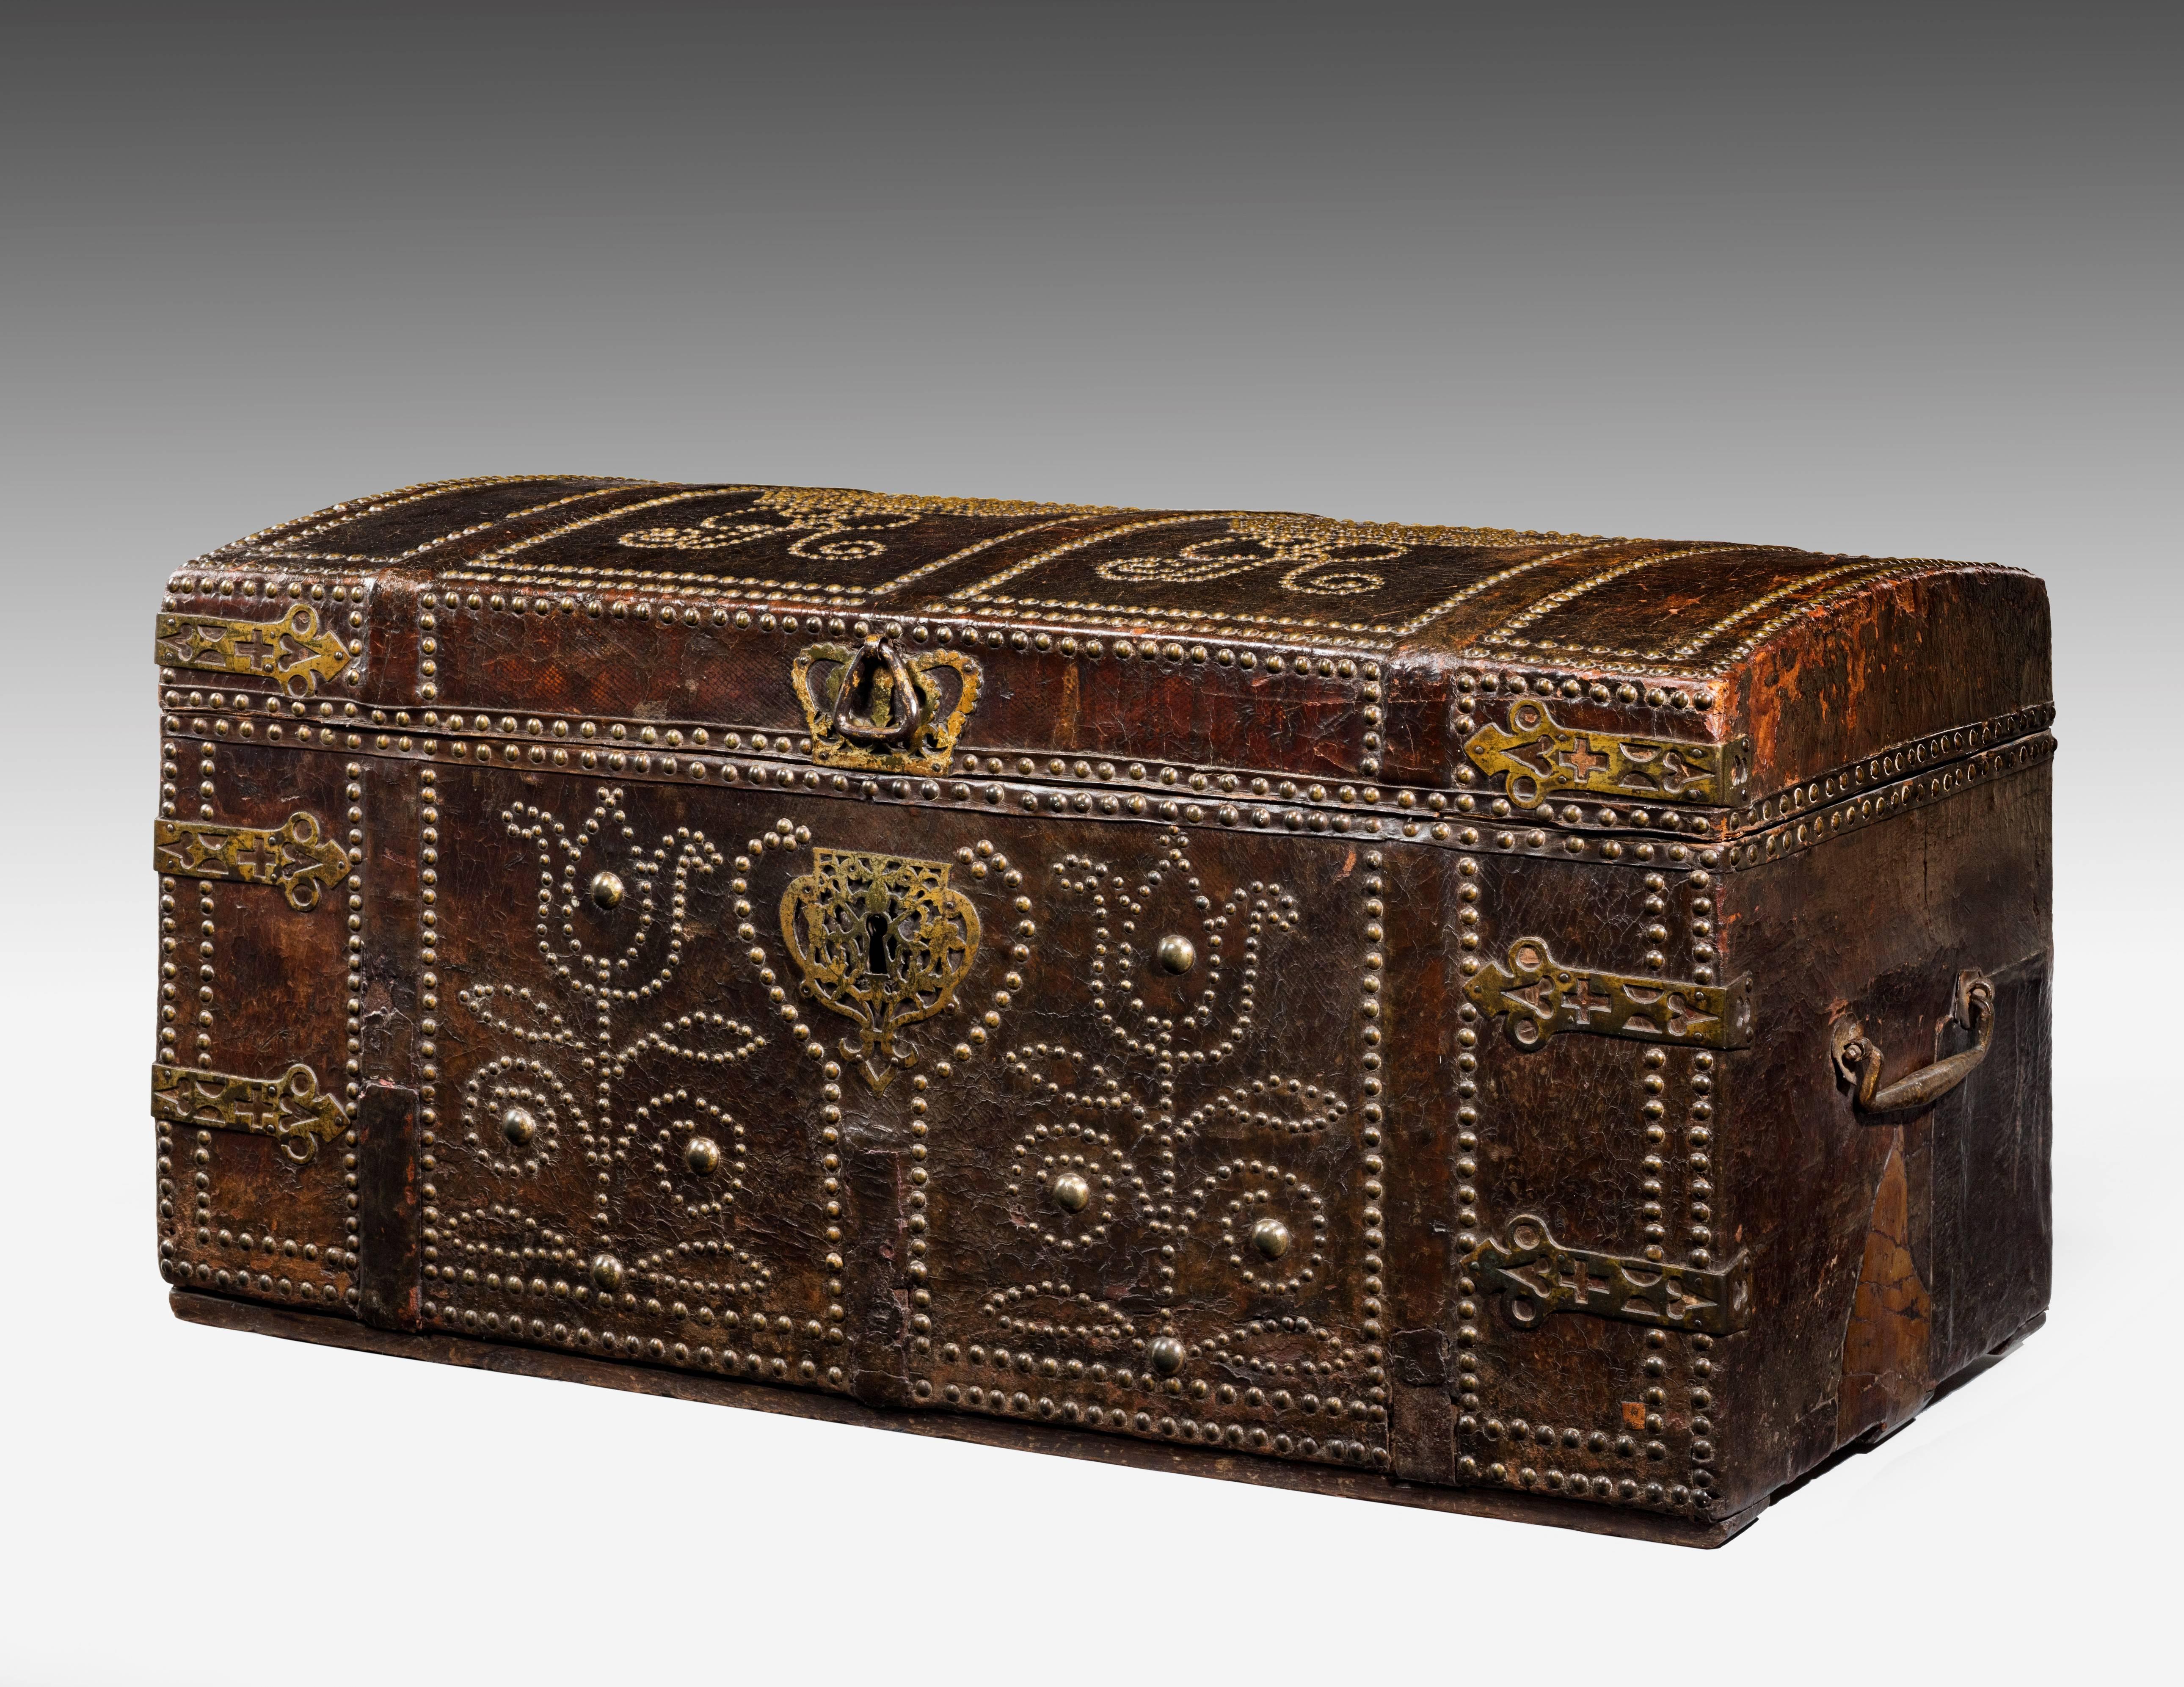 Attributed to James Parker ‘Trunk – Maker’.
Provenance: Formerly in the collection of Lord Sheffield.

A chest covered with a thin layer of leather, demonstrating the skill of the tanner. Decorated with brass studs which are used to form tulips;